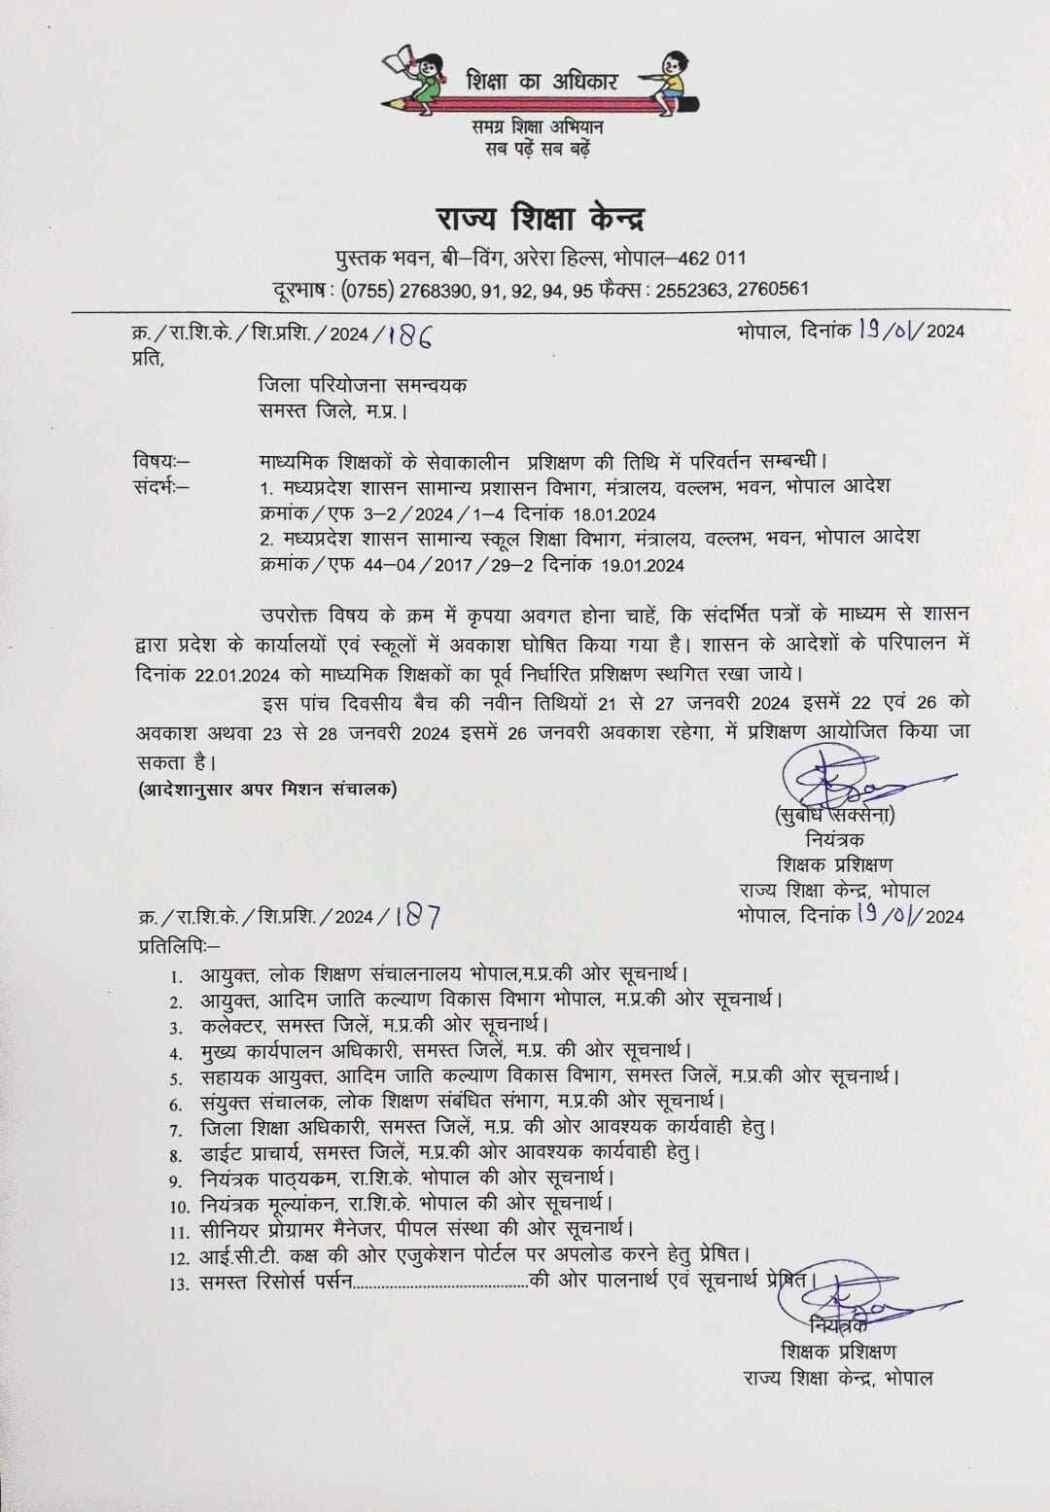 Change in the date of in-service training of MP secondary teachers